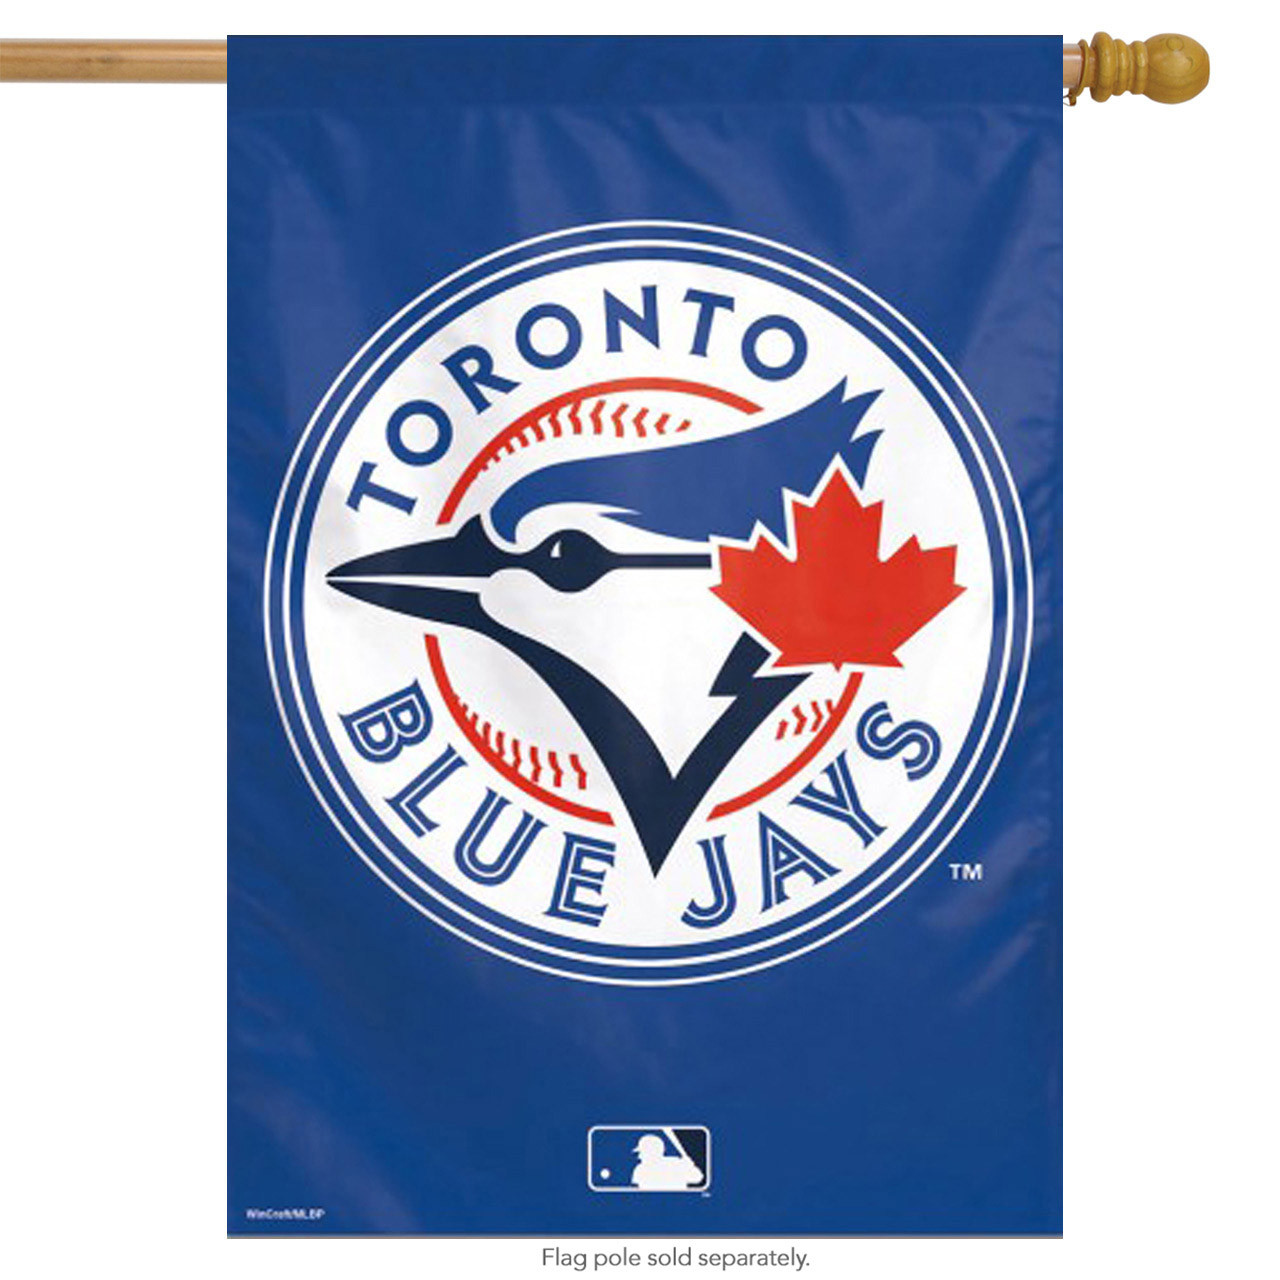 Amazoncom  MLB New York Mets WCR79712010 Team Flag 3 x 5  Sports  Related Flags  Sports  Outdoors